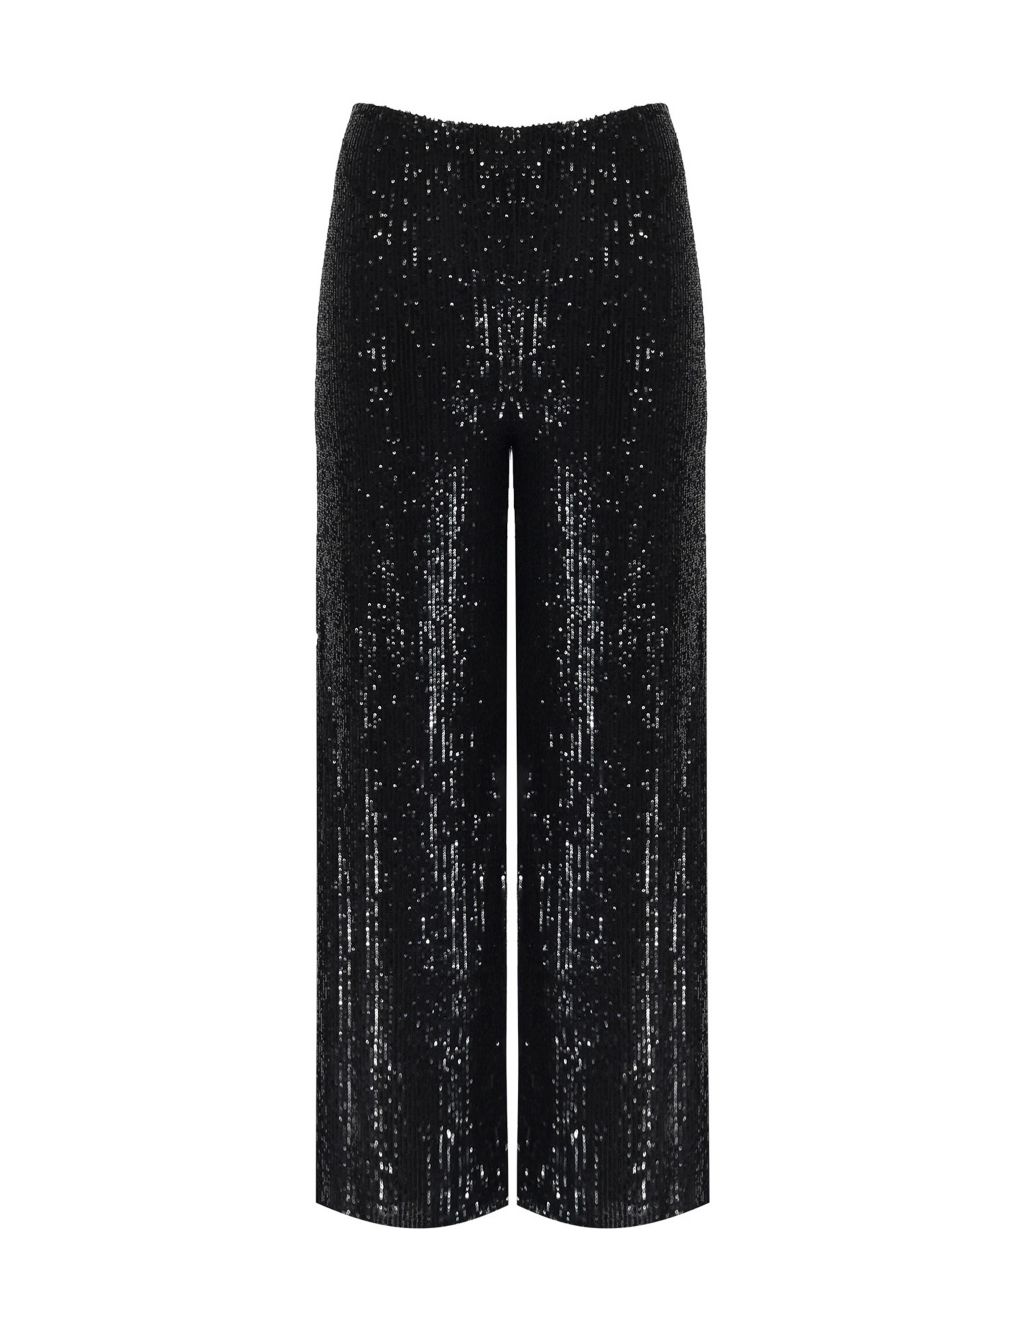 Sequin Straight Leg Trousers image 2